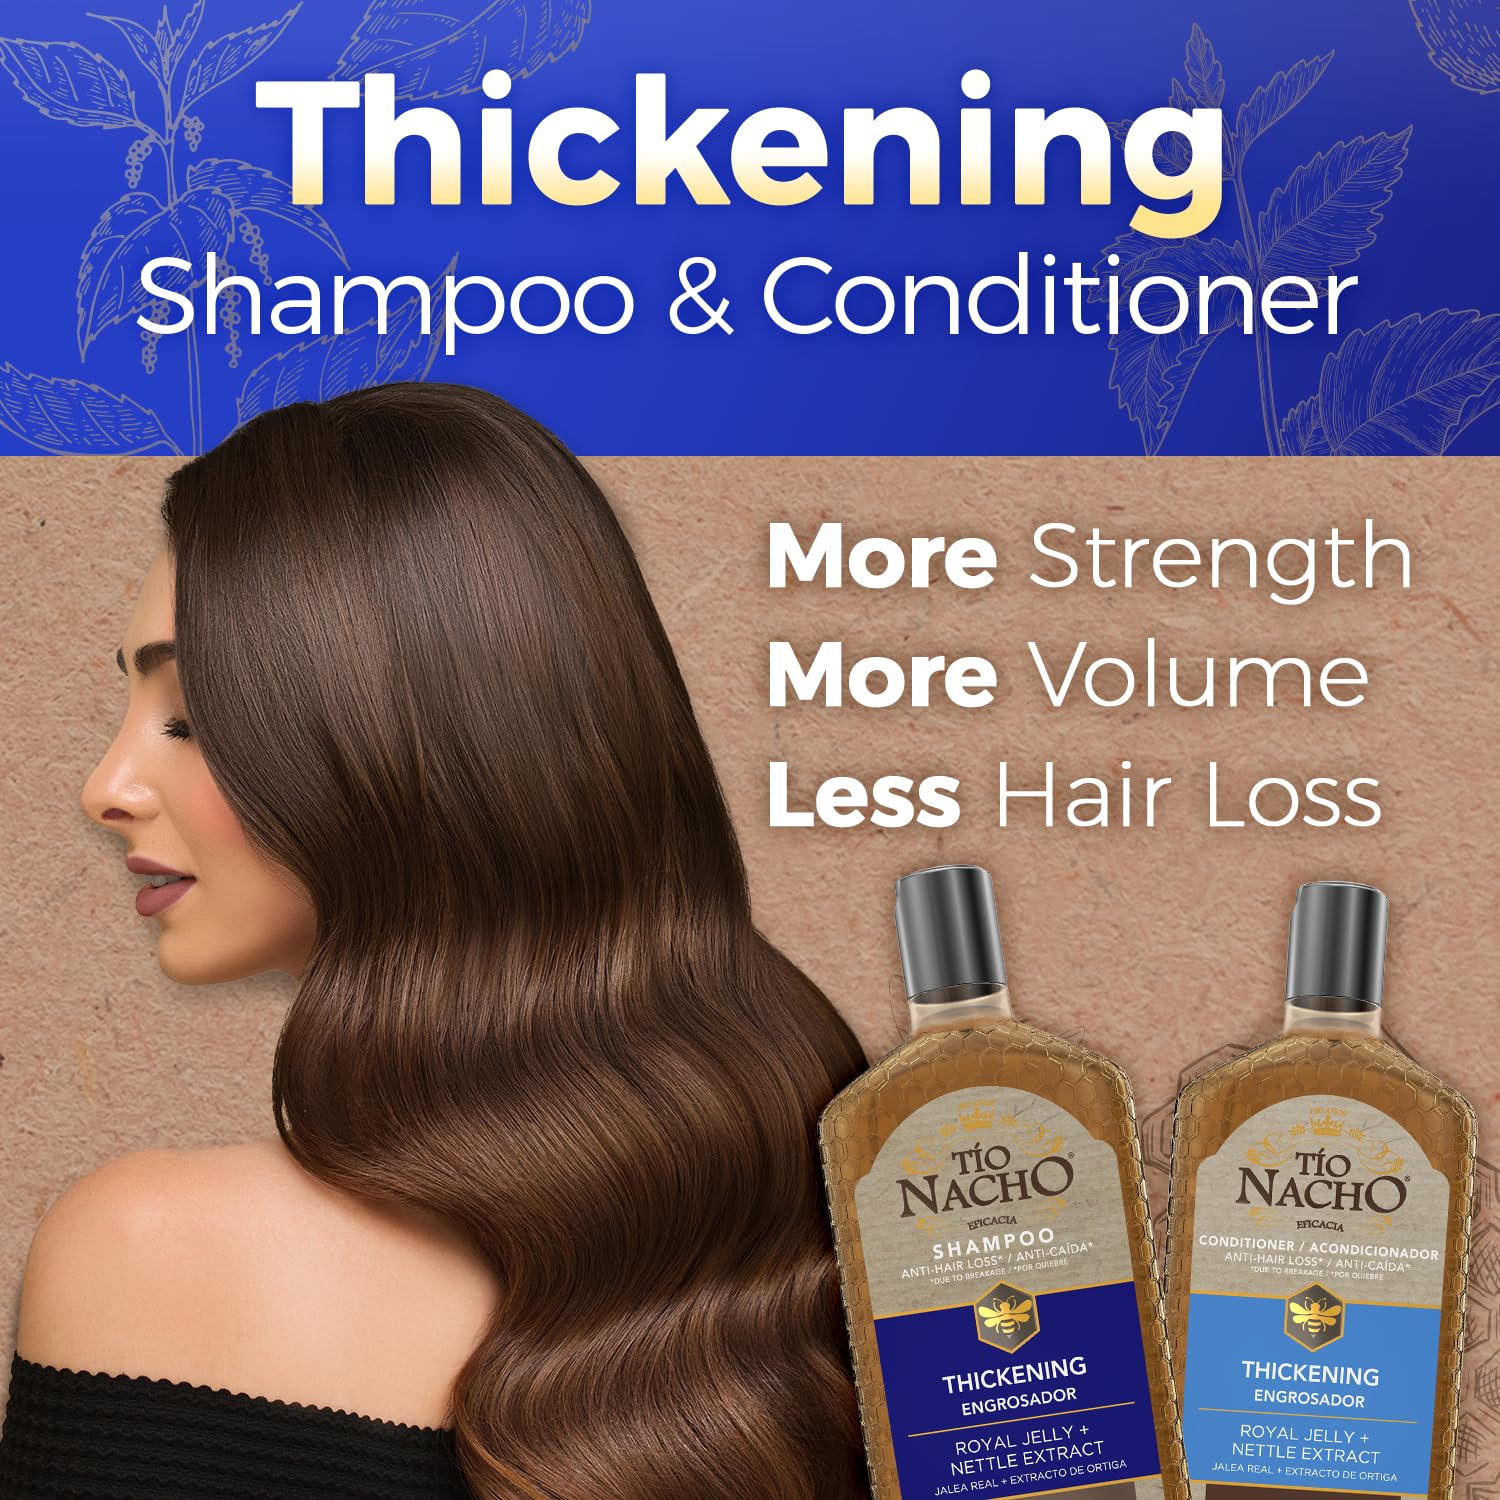 Tio Nacho Thickening Shampoo and Conditioner Set: Capilgross, Royal Jelly, Nettle, Aloe Vera, Reduces Hair Loss, Strengthens, Nourishes, Volumizes - 14 fl oz Each